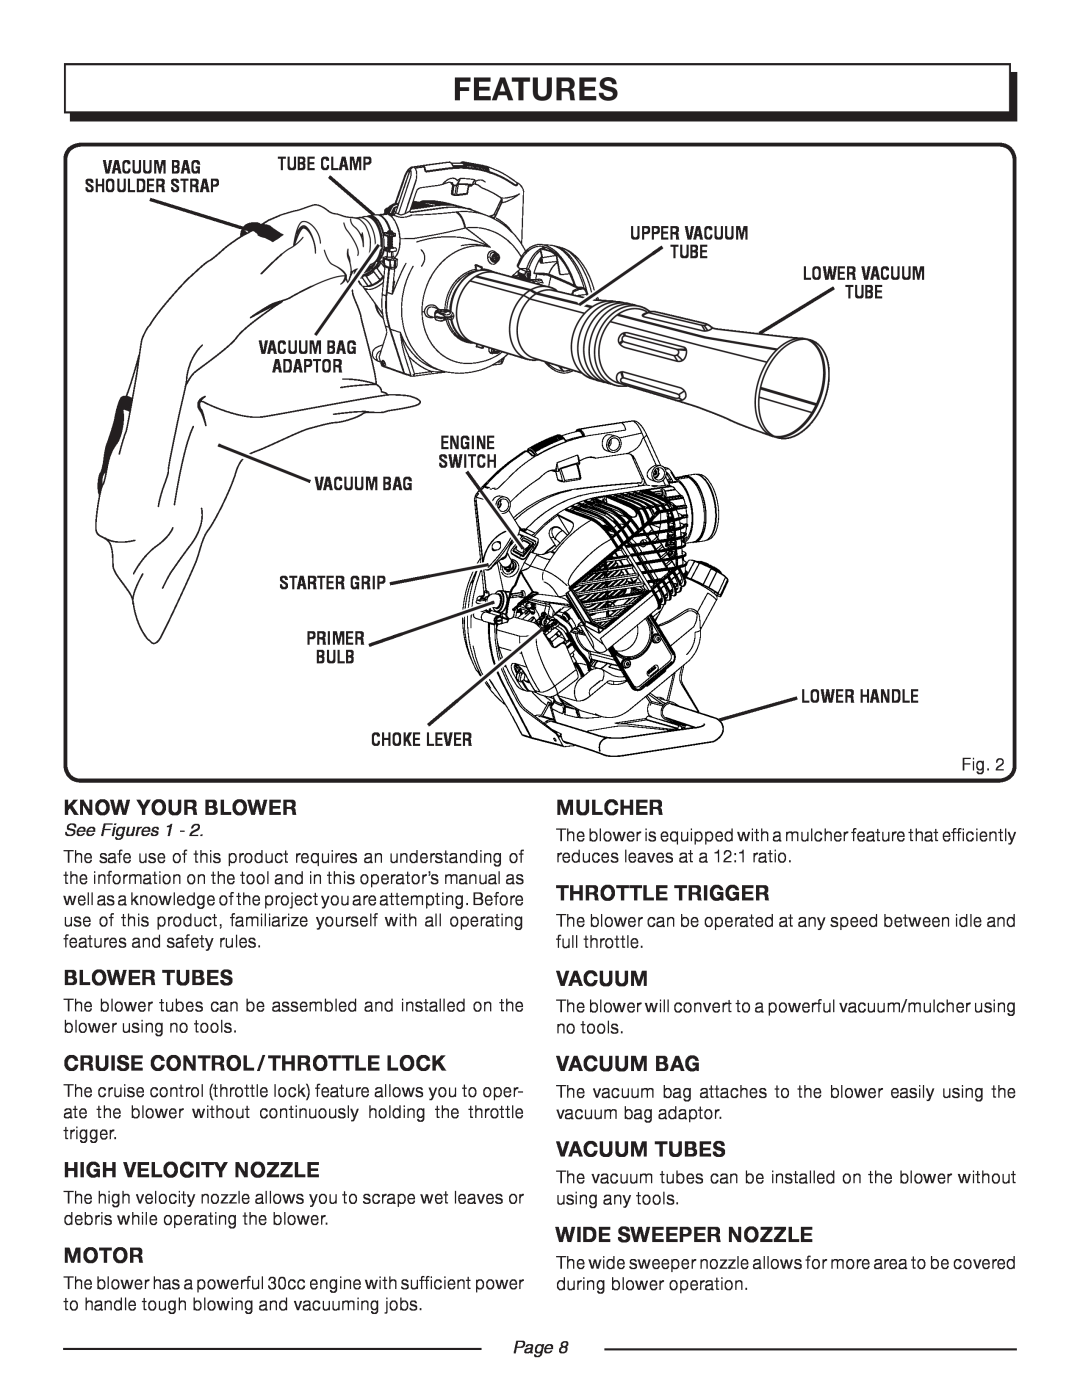 Homelite UT08947 manual Features, Know Your Blower 